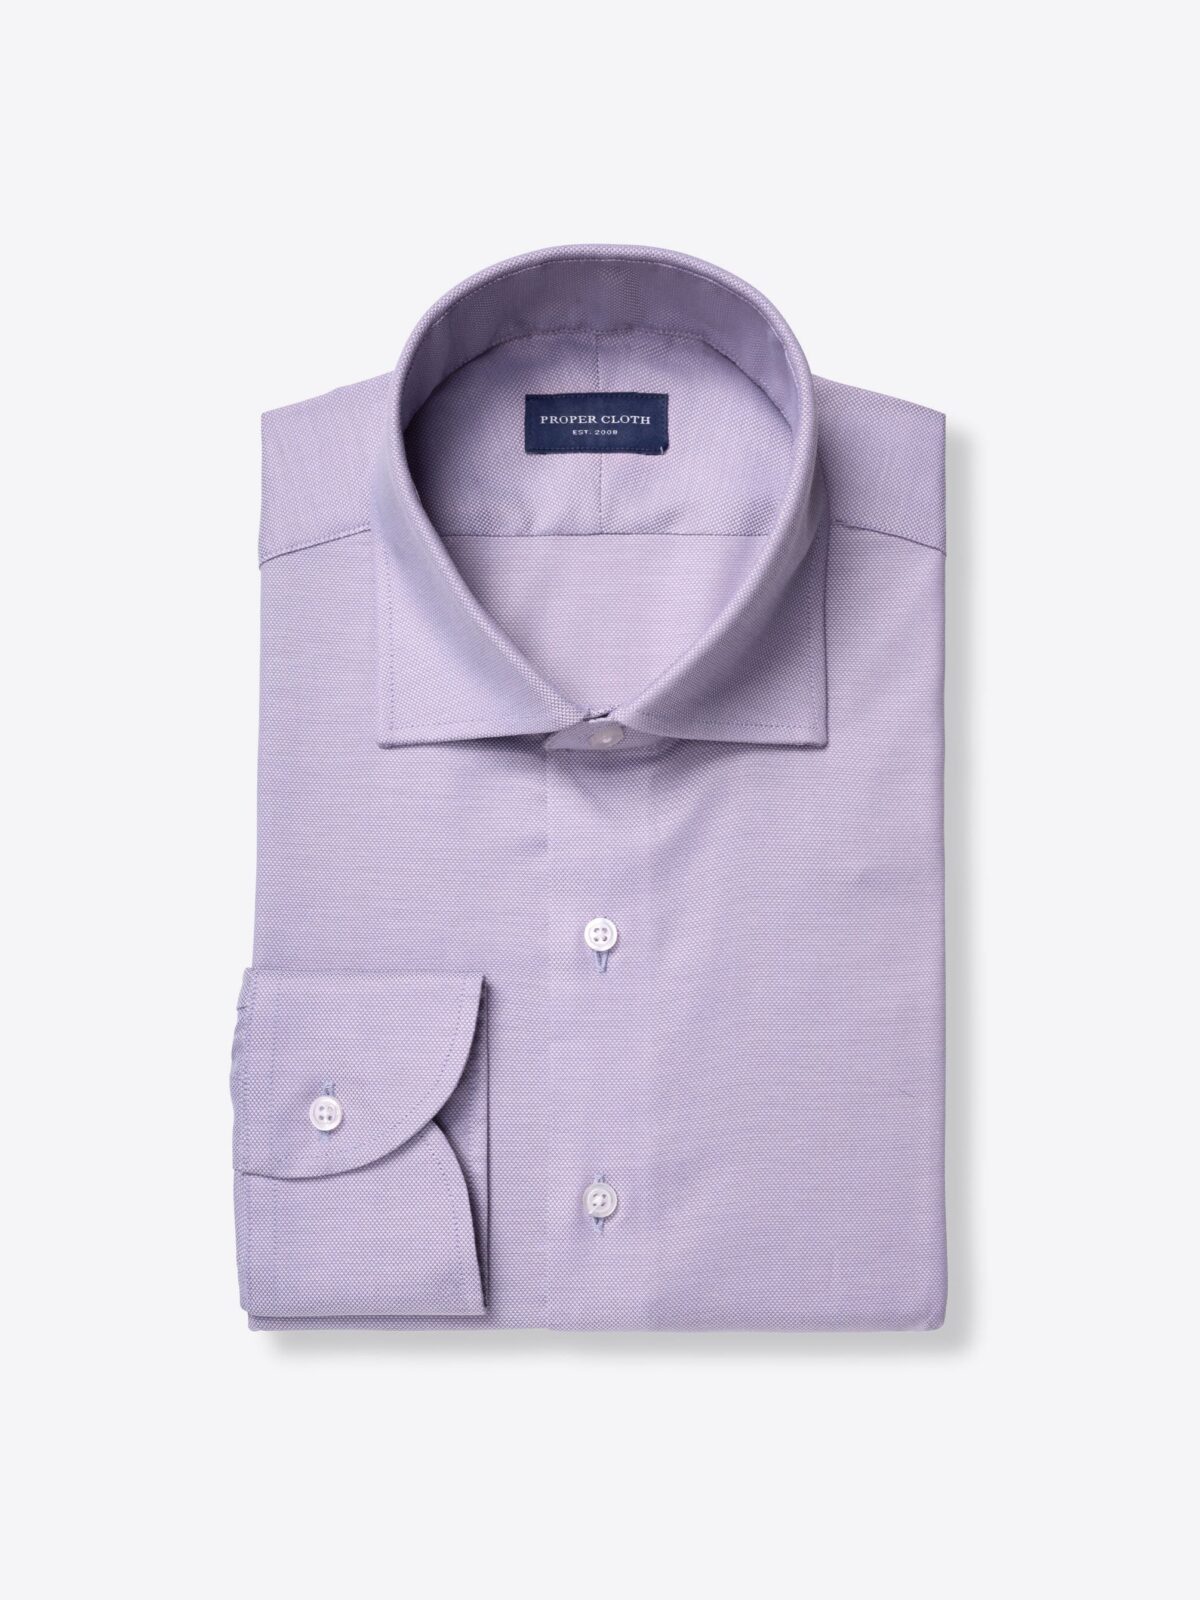 Canclini Lavender Wrinkle Resistant Royal Oxford Shirt by Proper Cloth